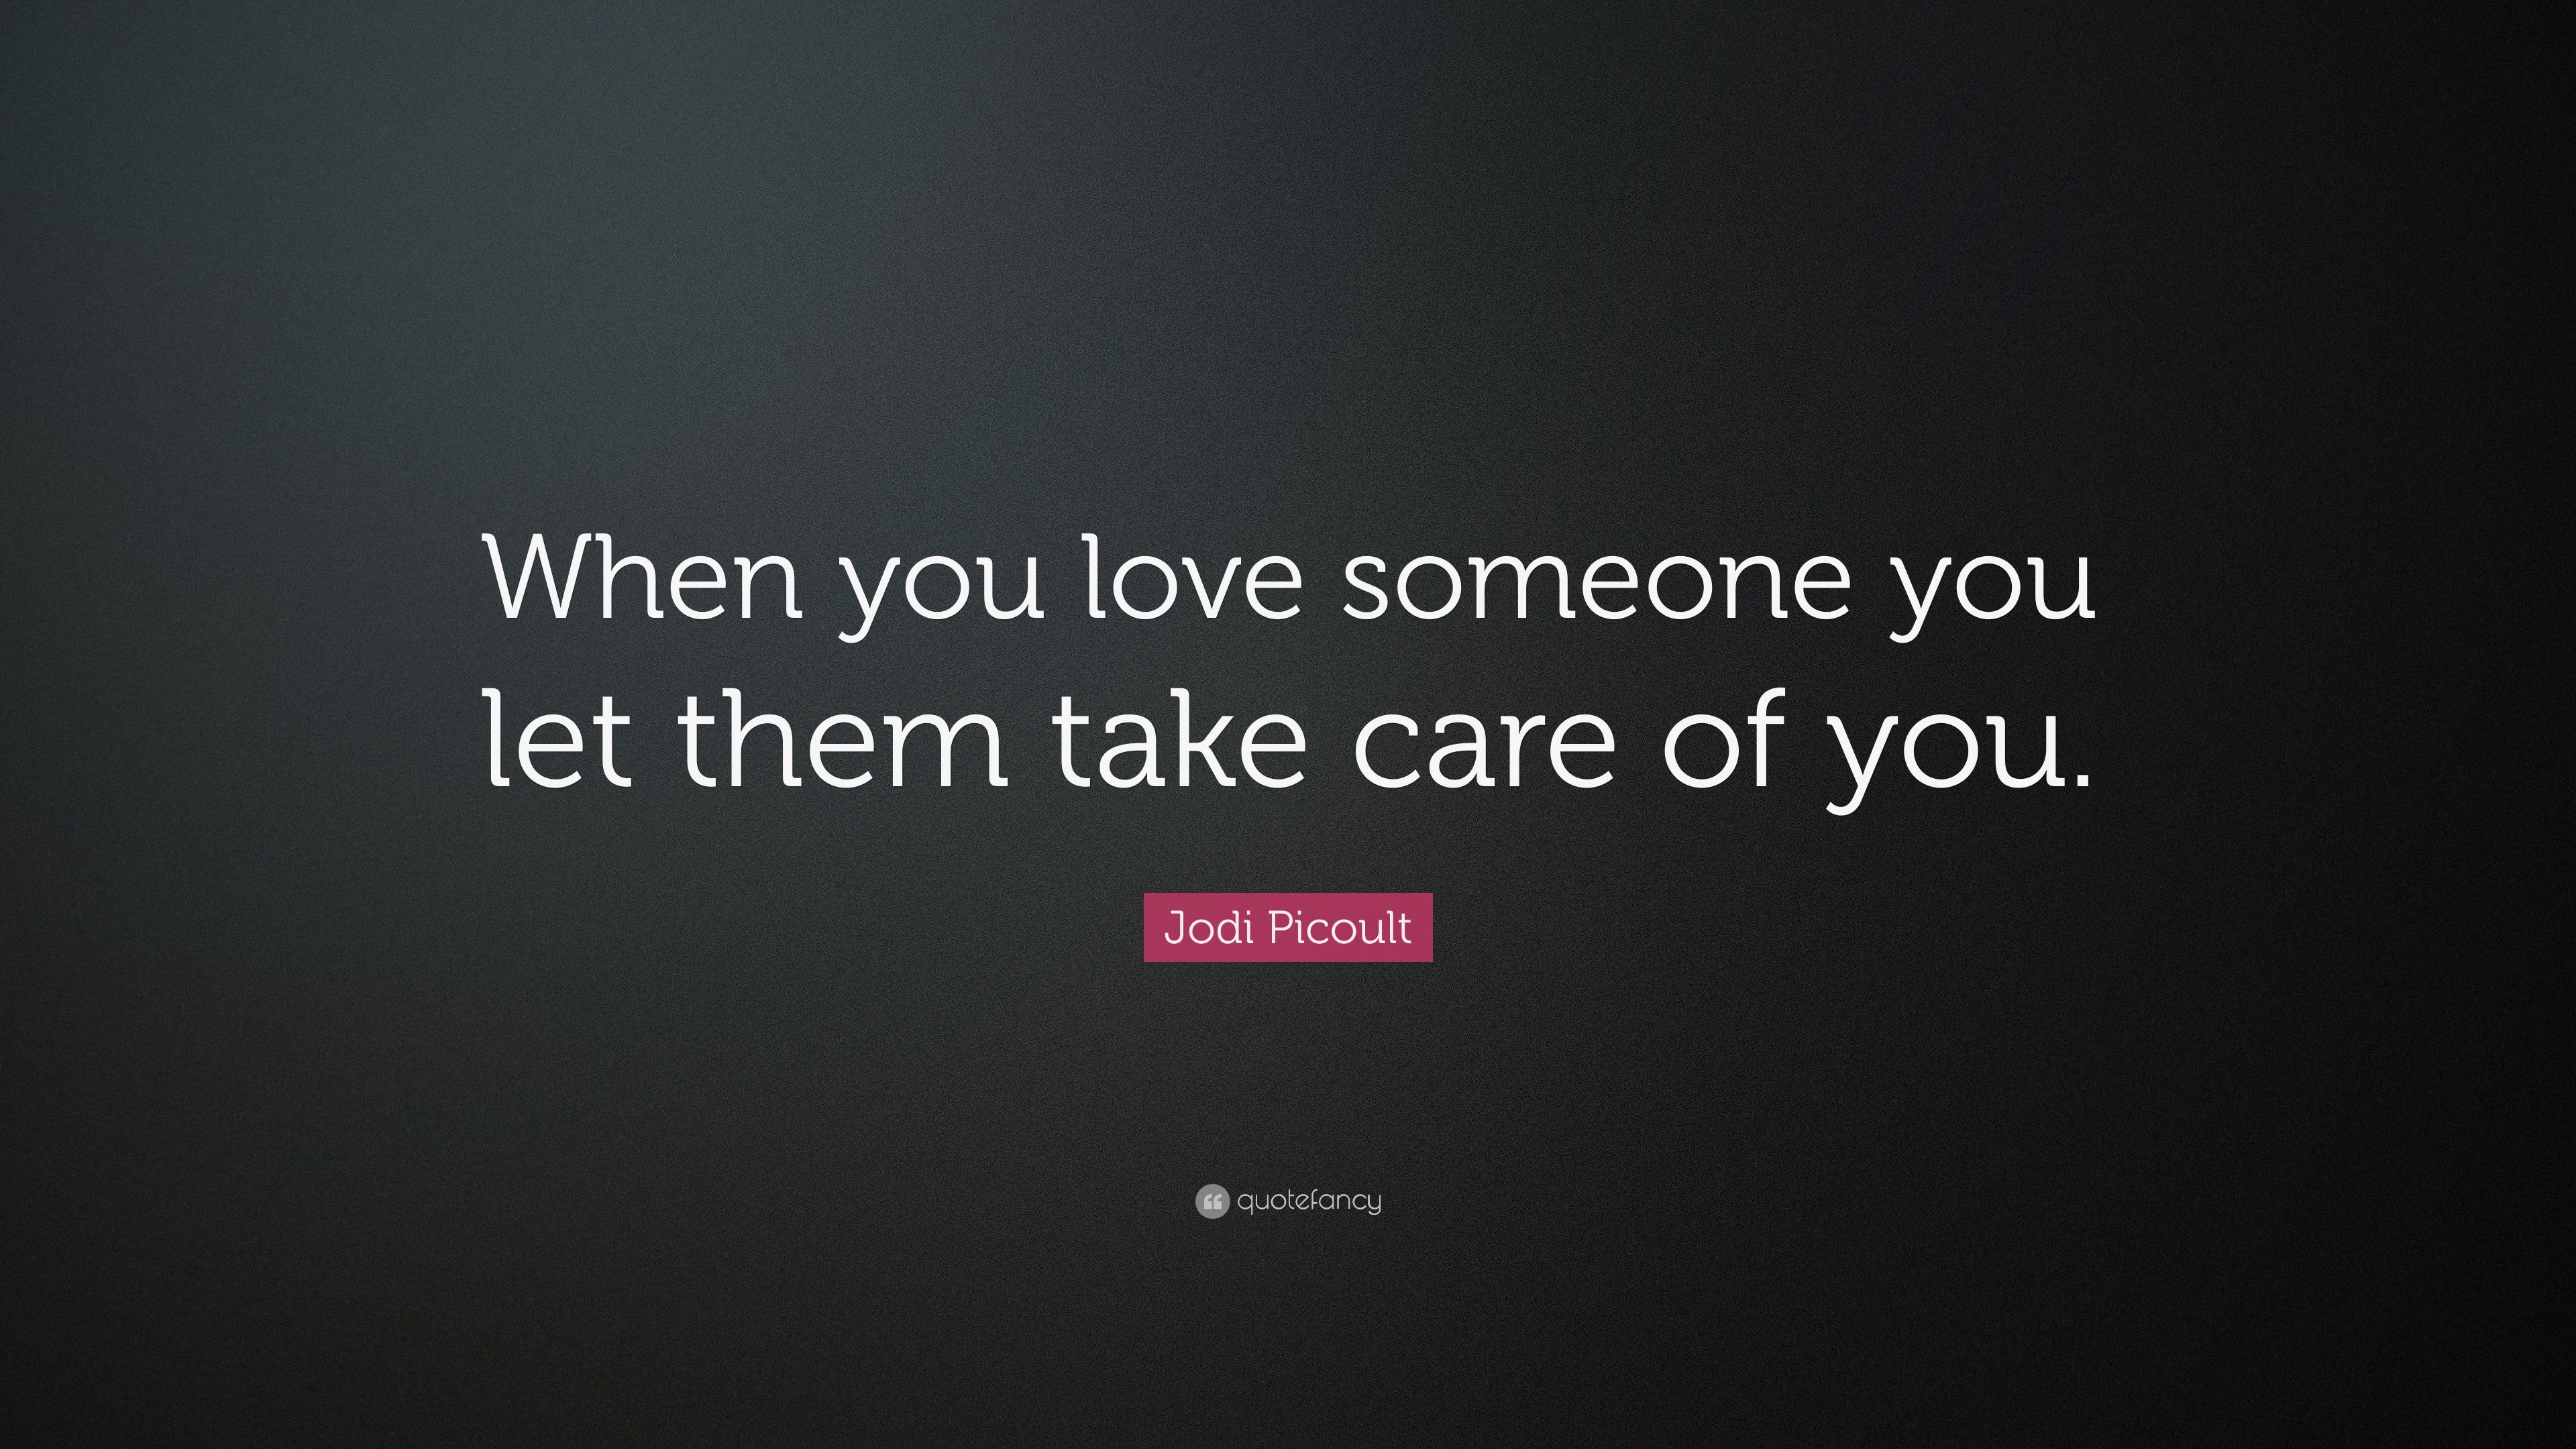 Jodi Picoult Quote: “When you love someone you let them take care